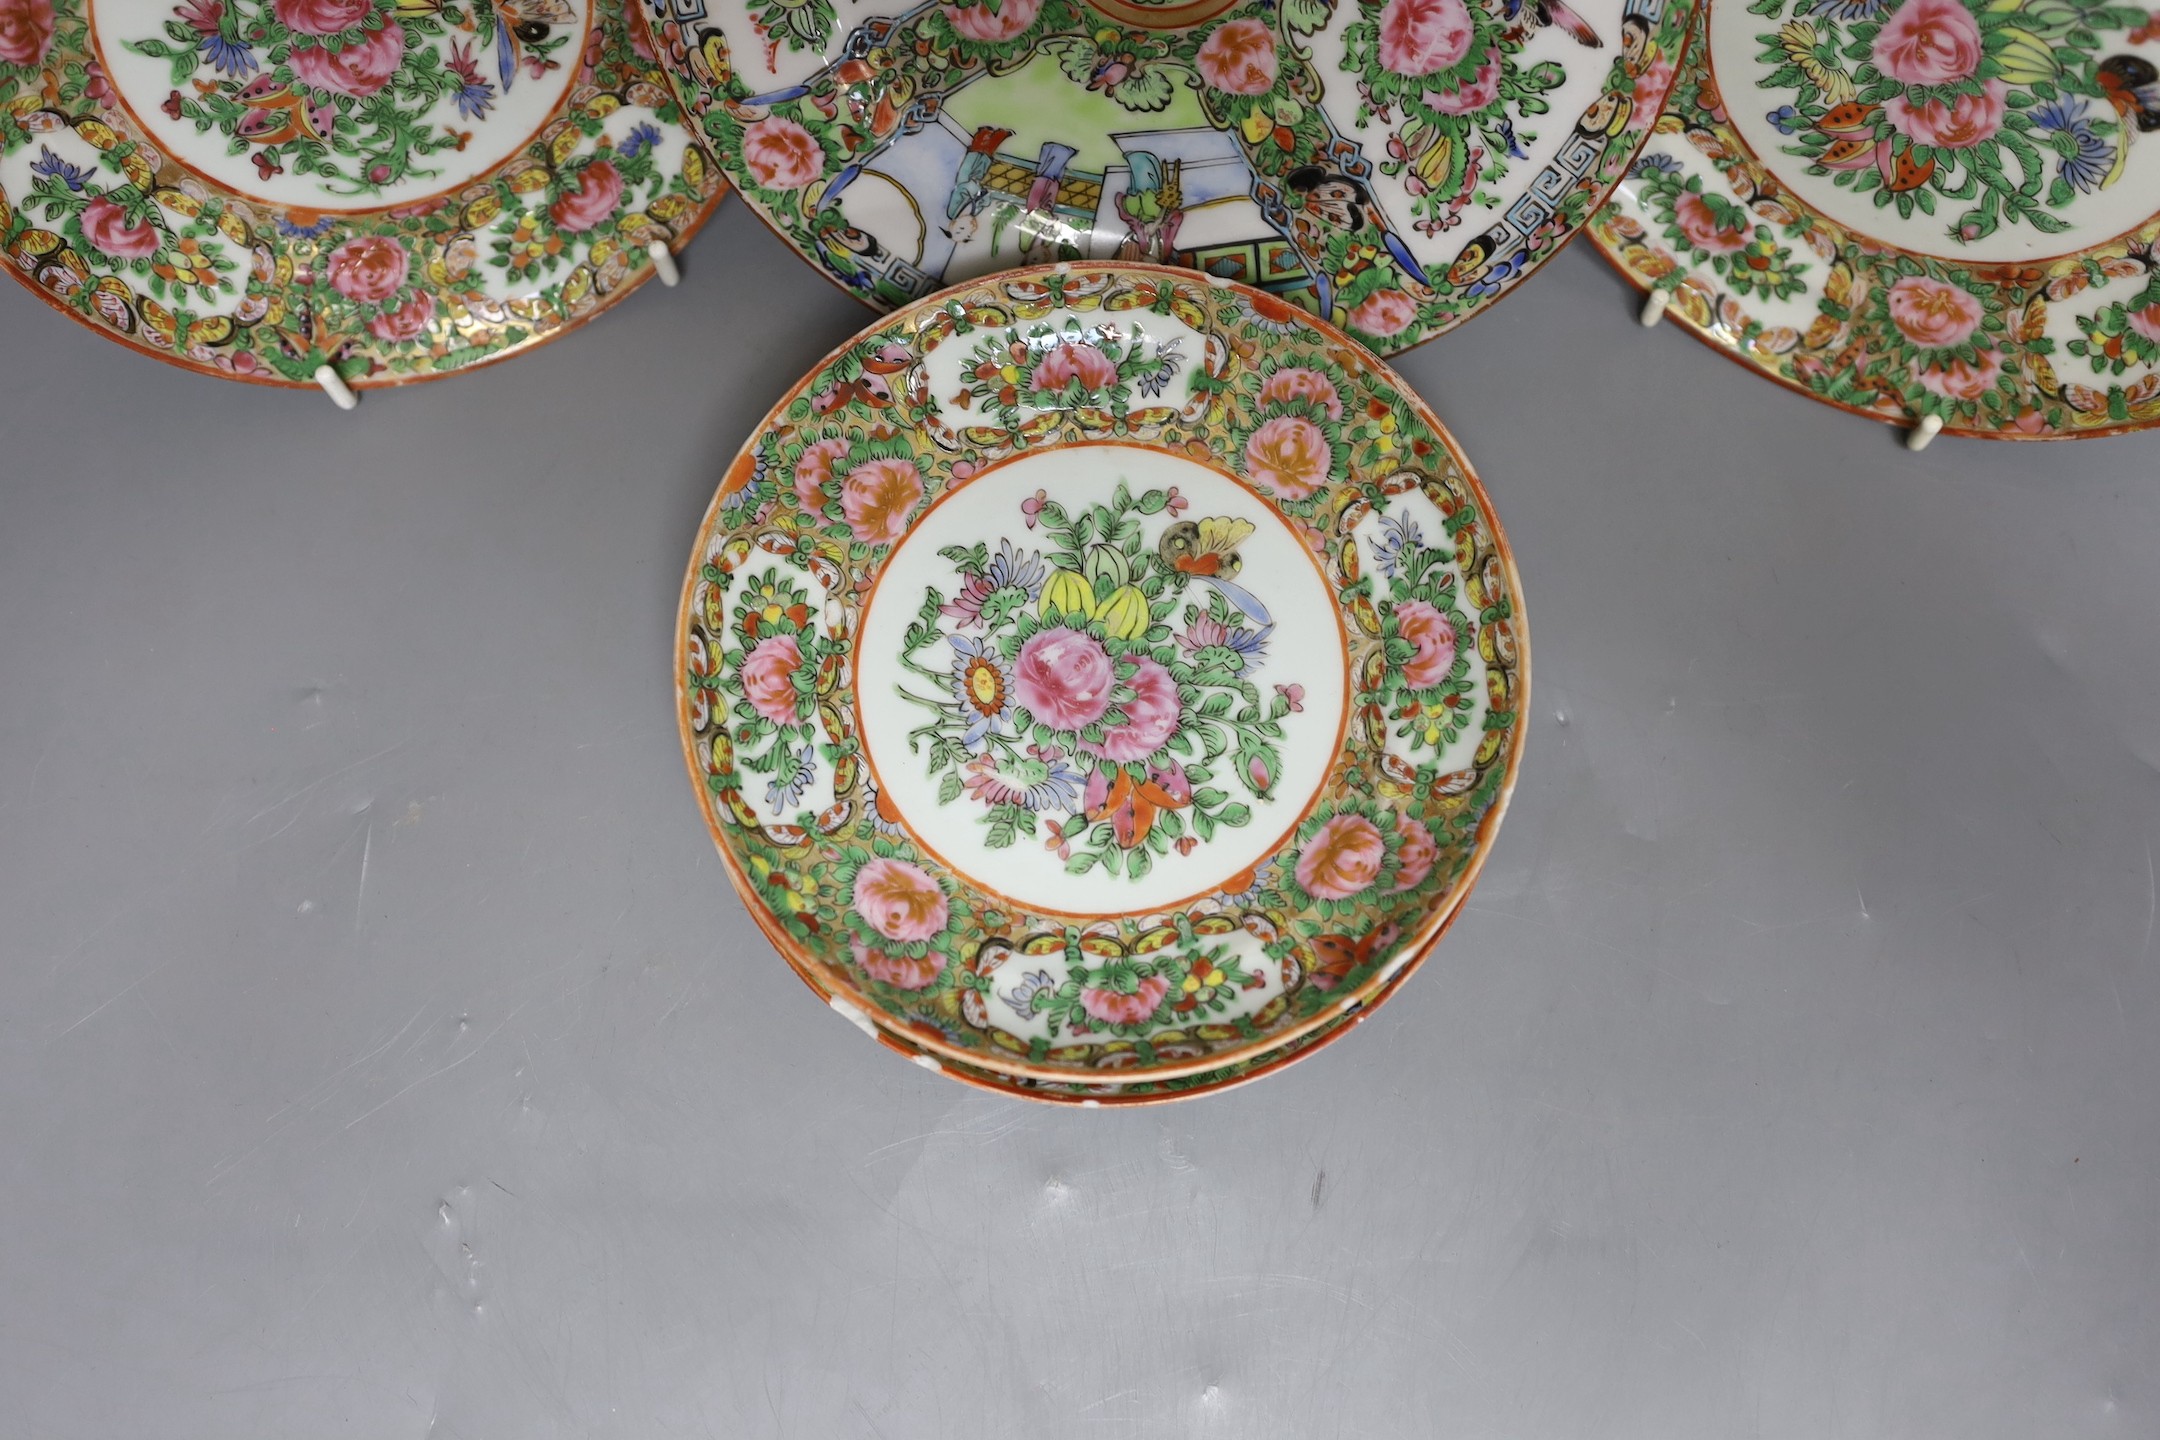 Six 19th / 20th century Chinese famille rose dishes